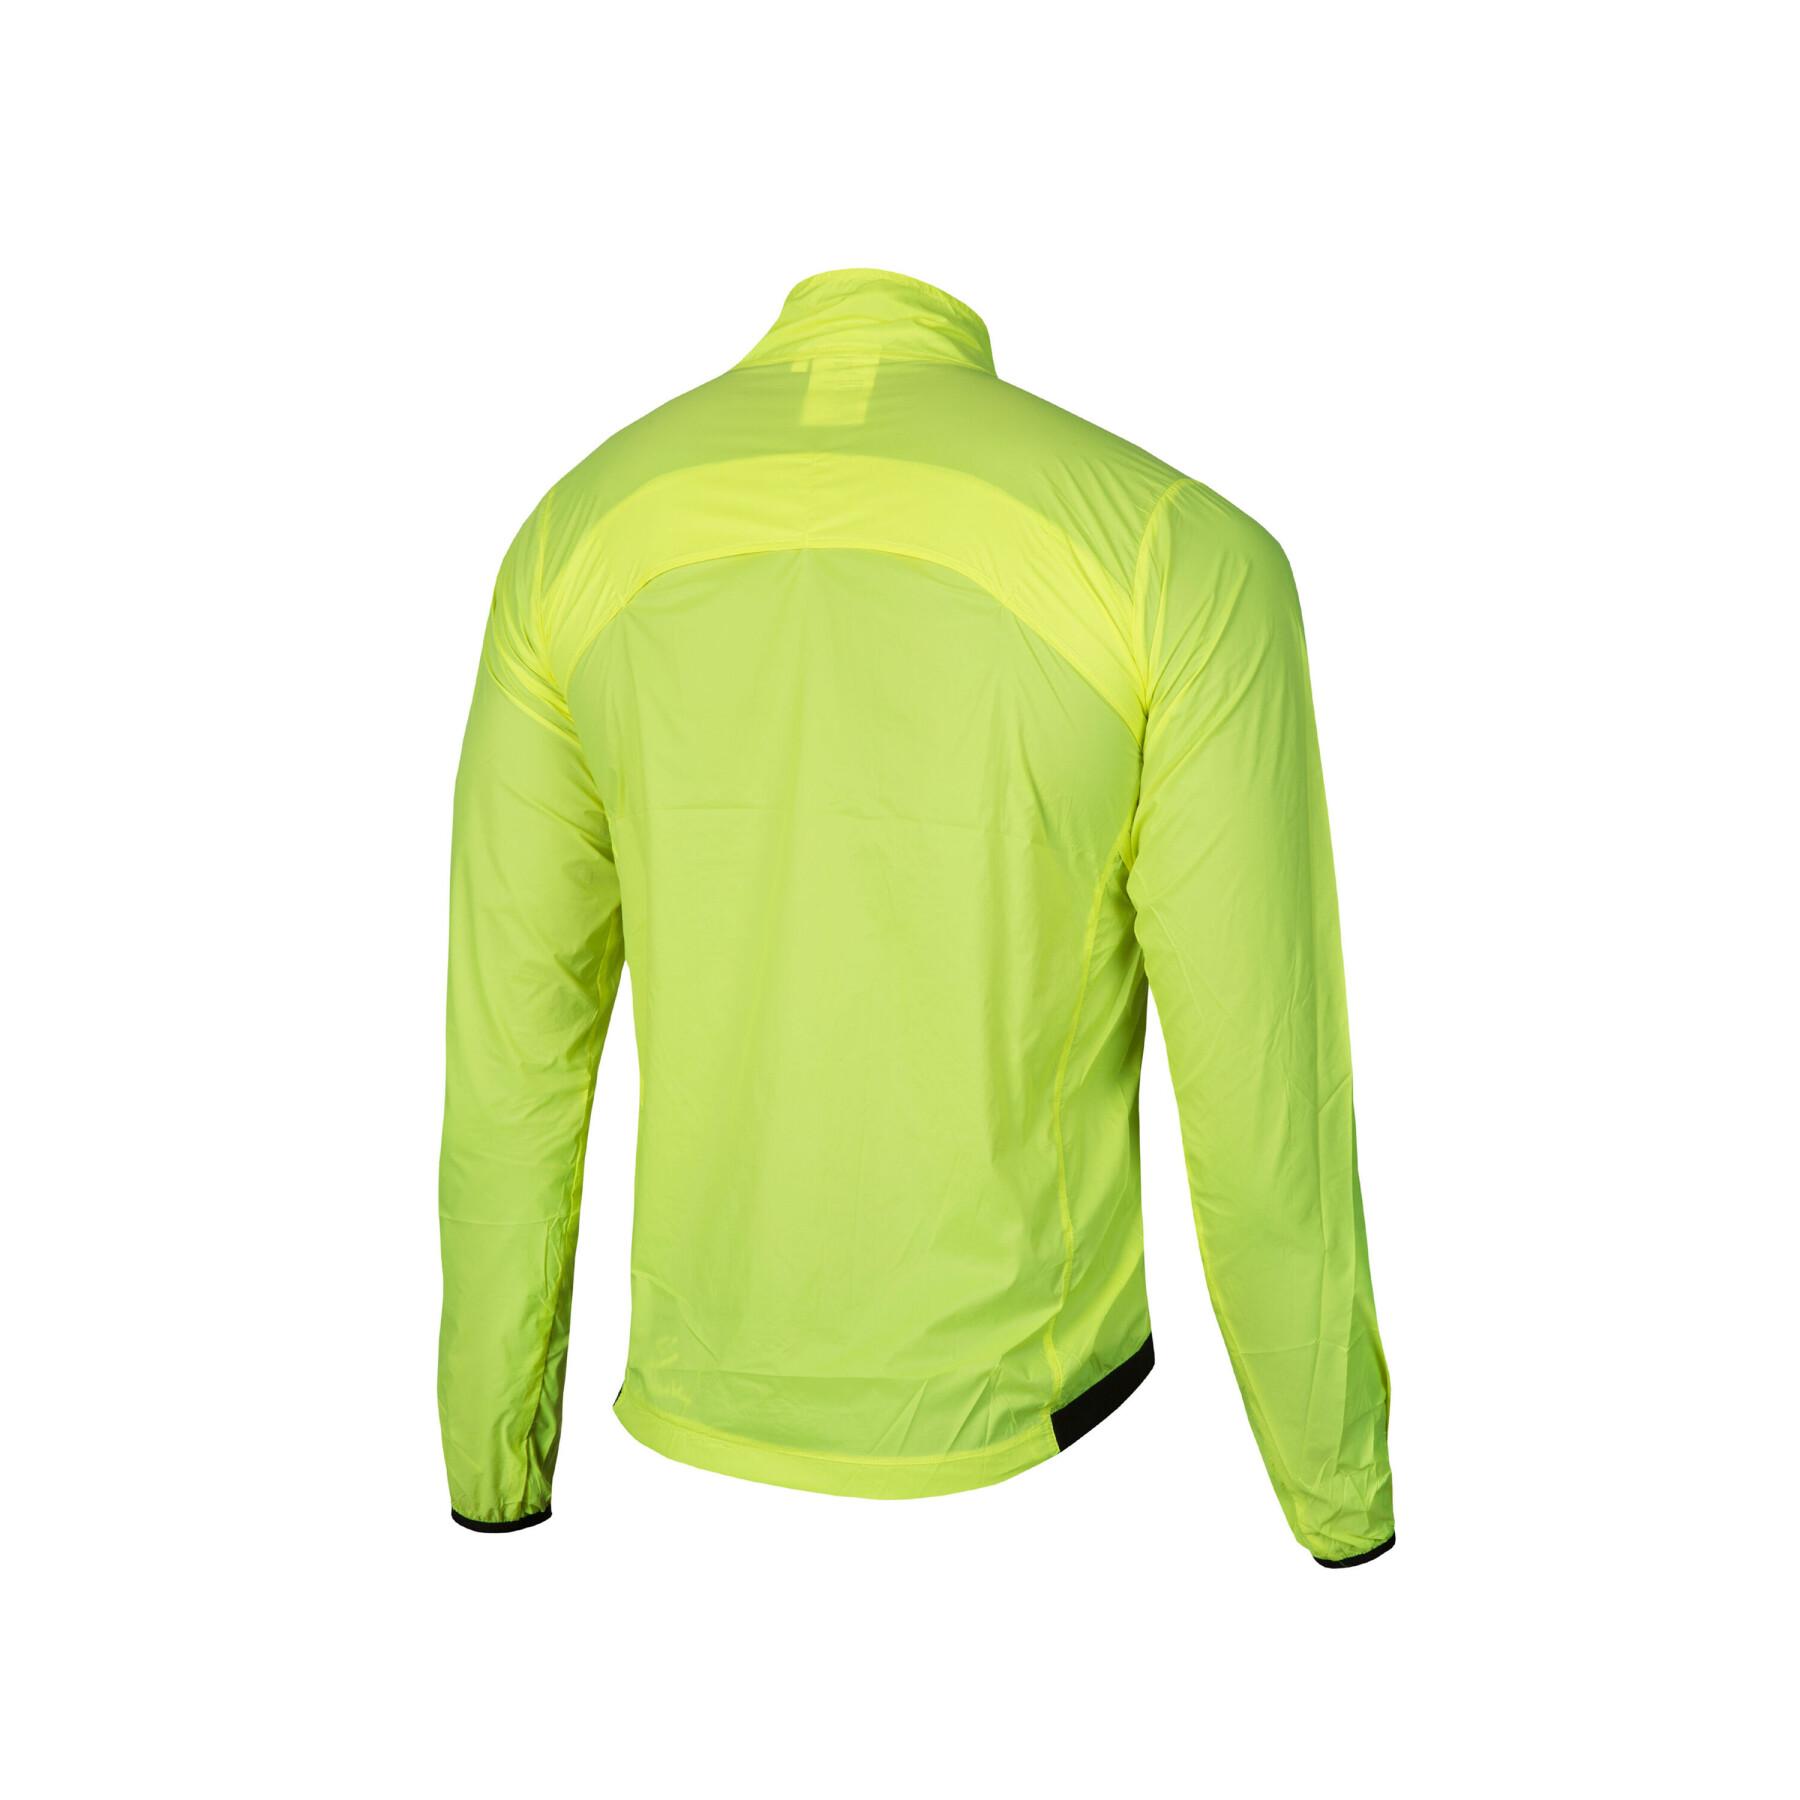 Chaqueta impermeable Spiuk Anatomic